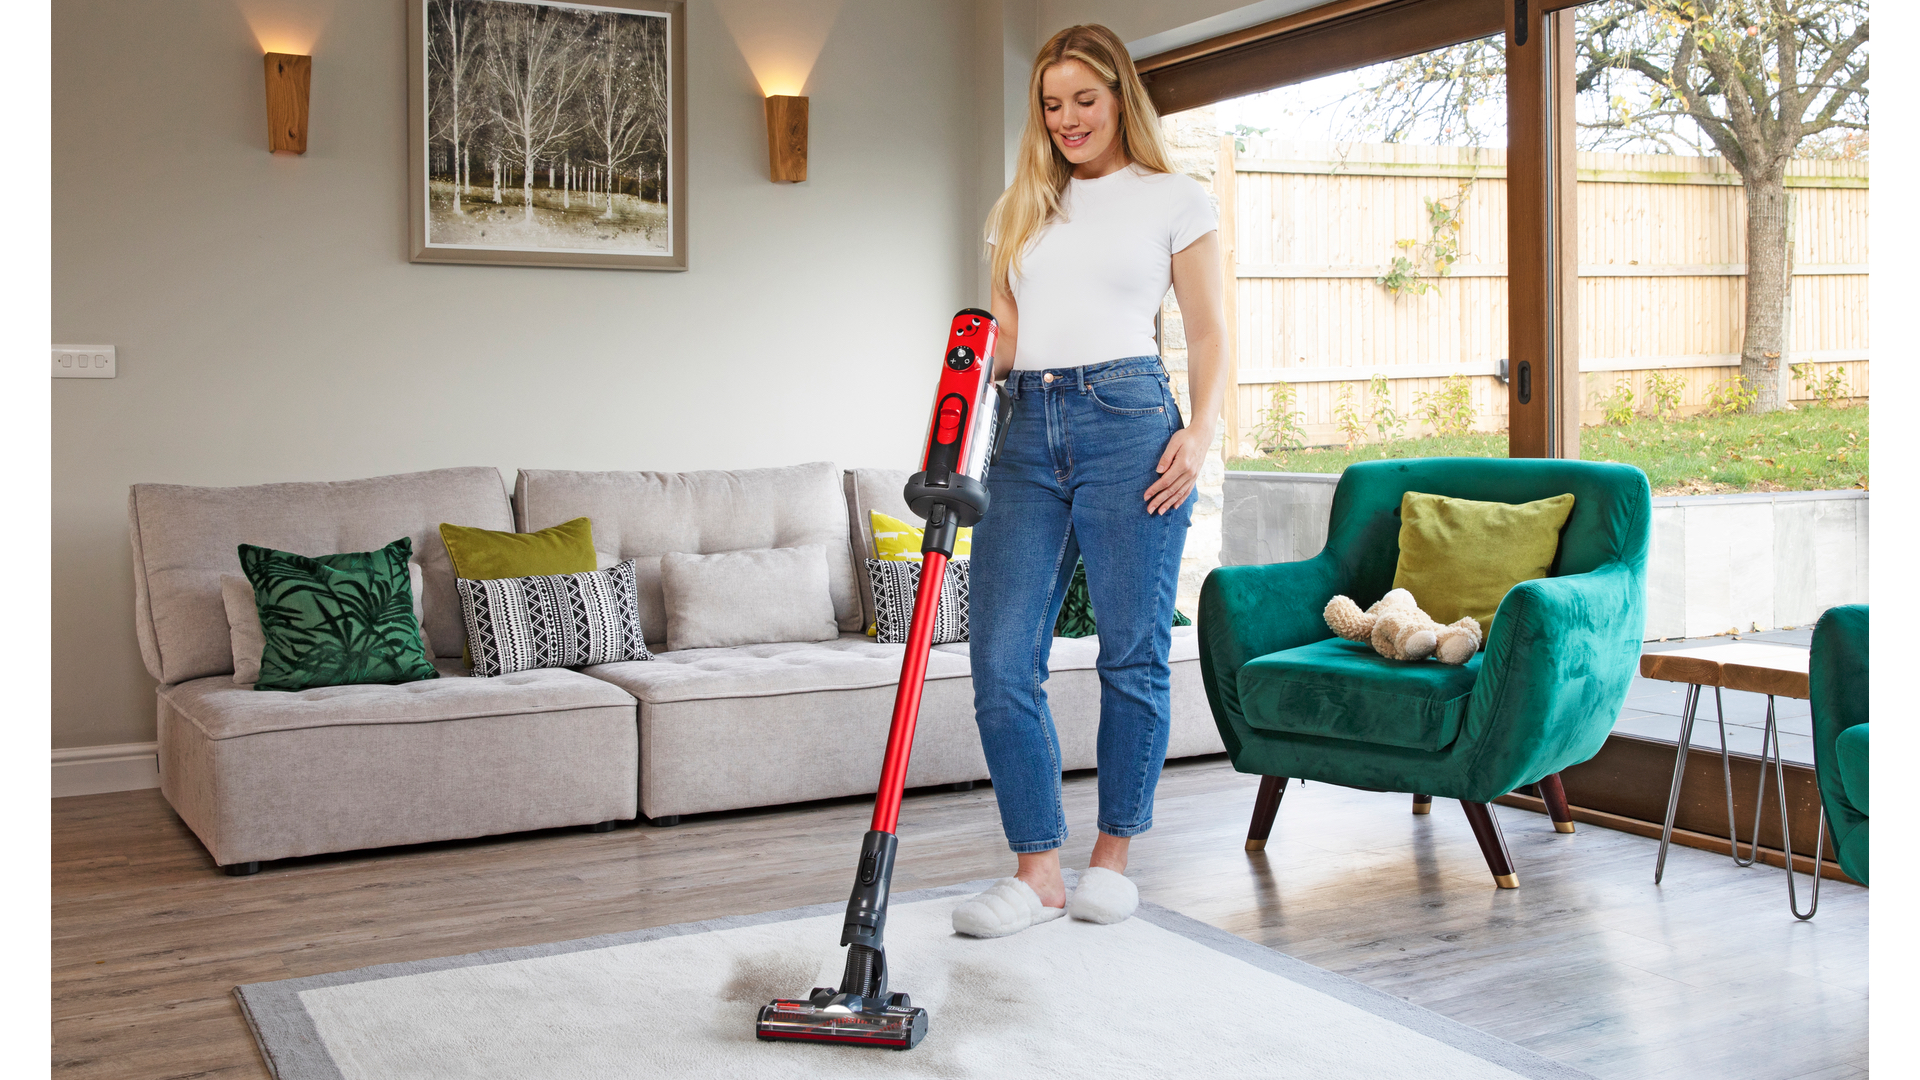 Henry cordless vacuum cleaner review: Latest model tried and